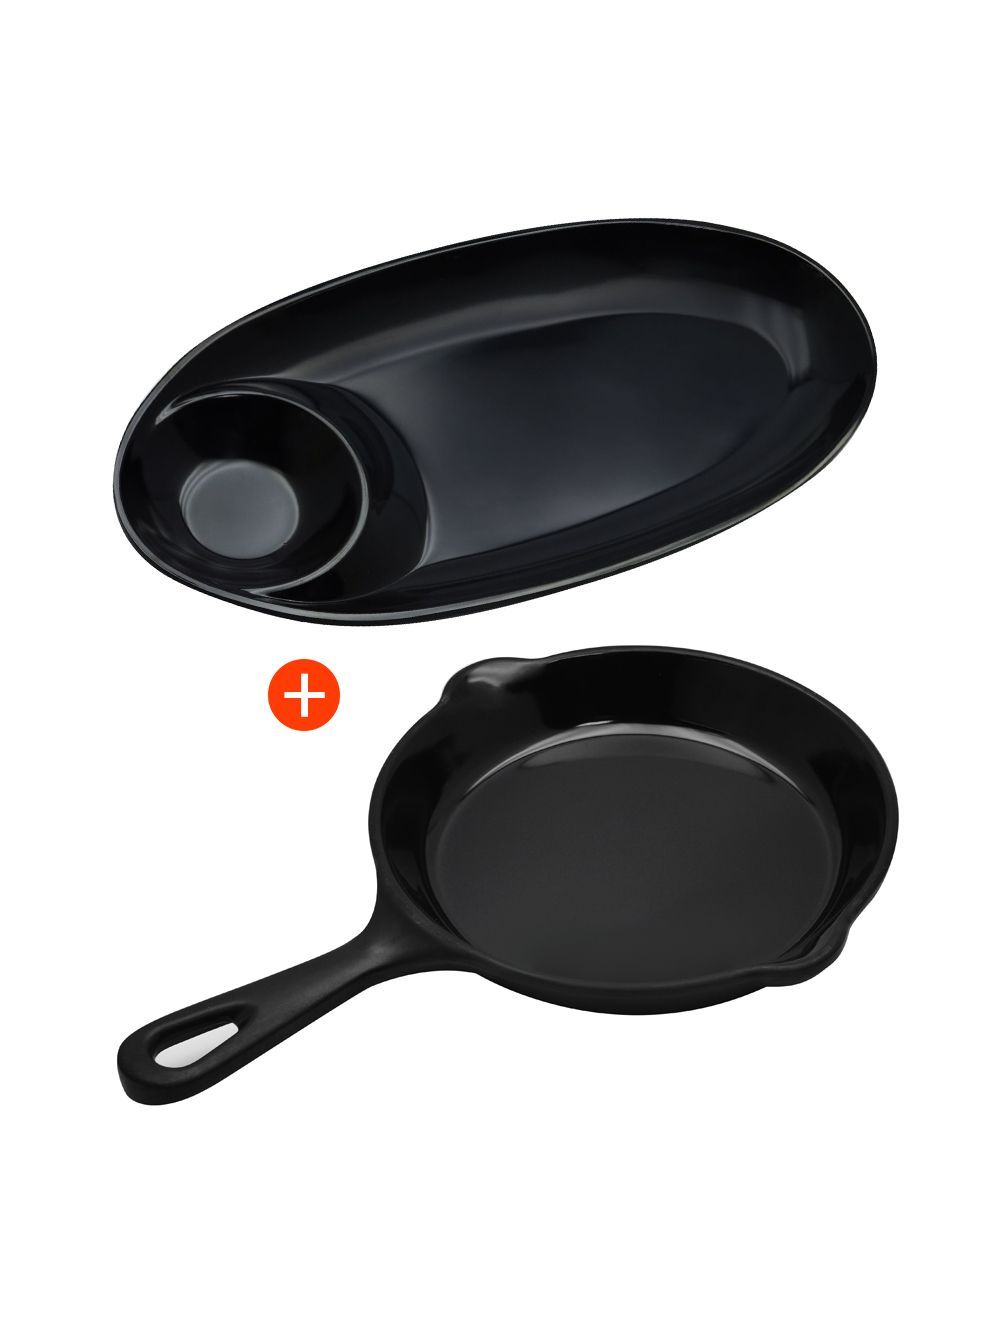 Combo of Dinewell Black Round Serving Bowl 21.5cm With Divided Serving Tray-DWMB036B+DWC2124B